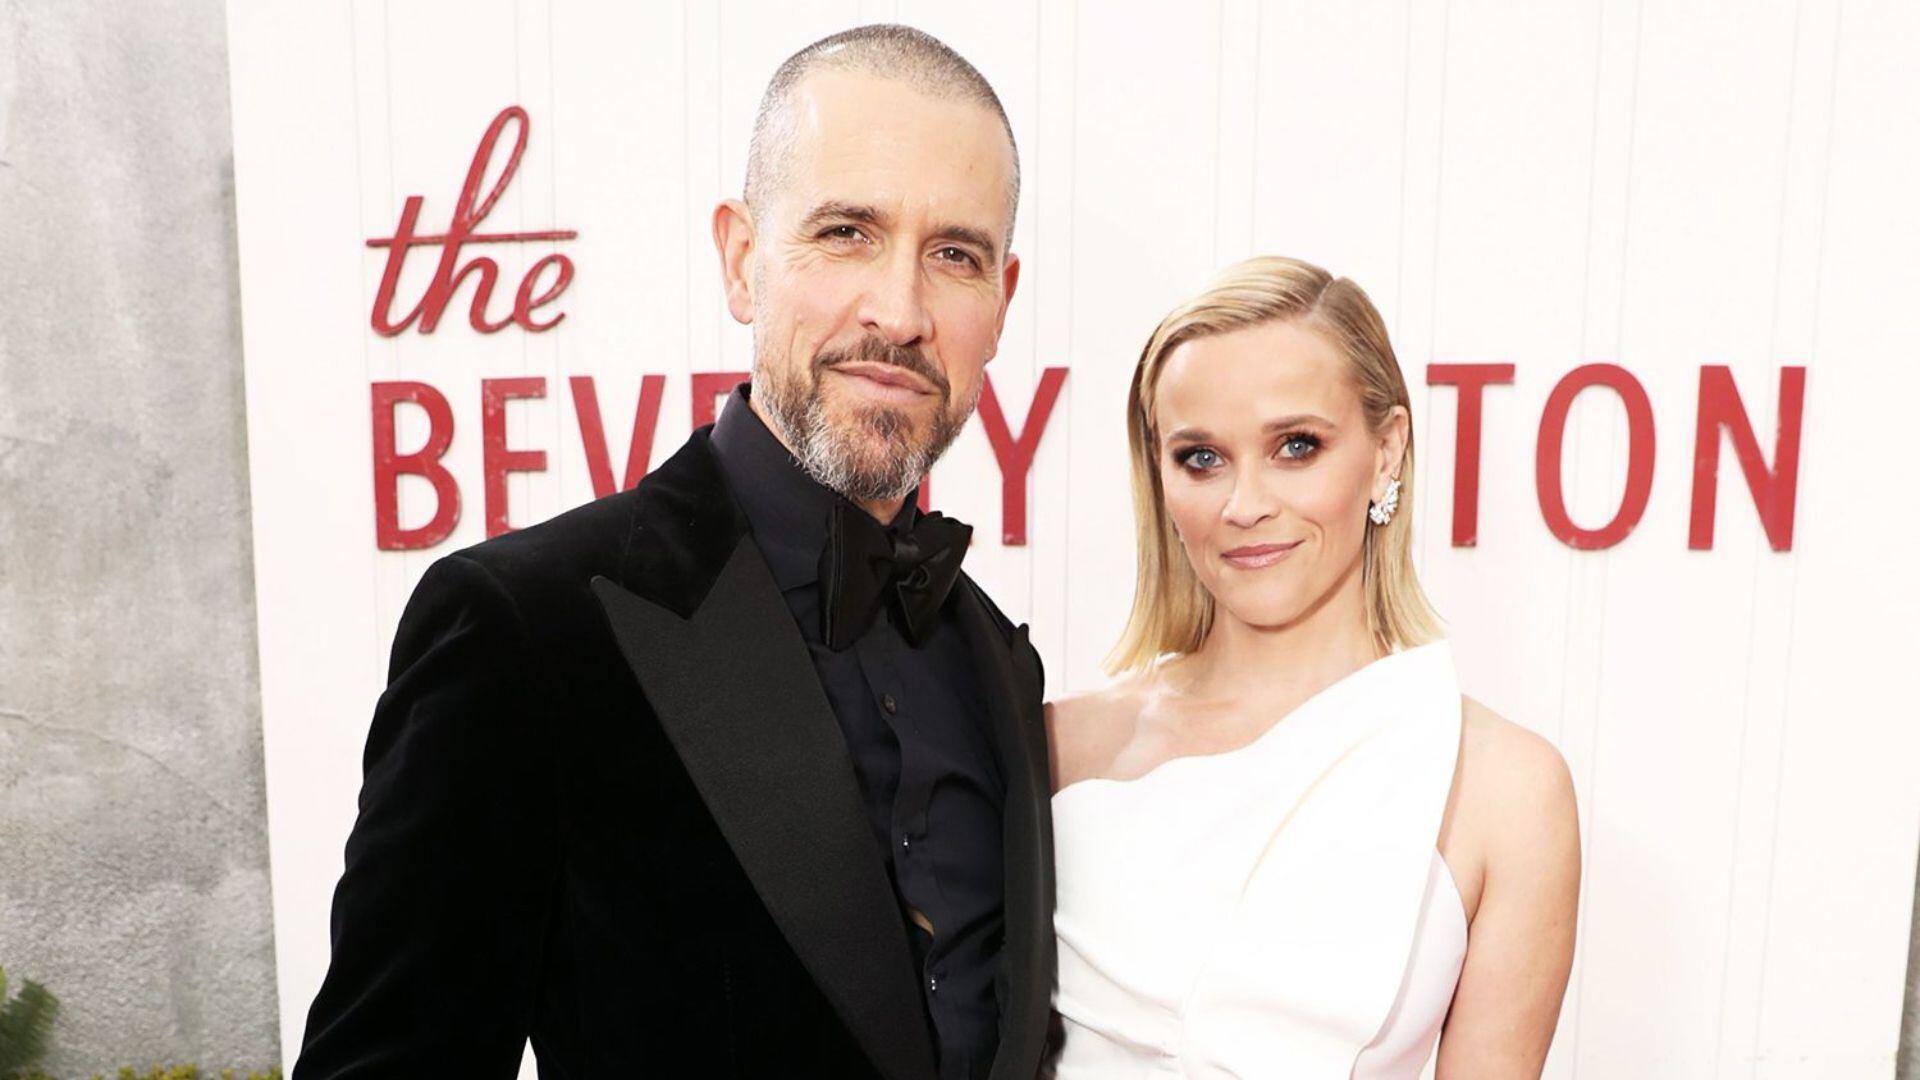 Reese Witherspoon junto a su ex esposo Jim Toth